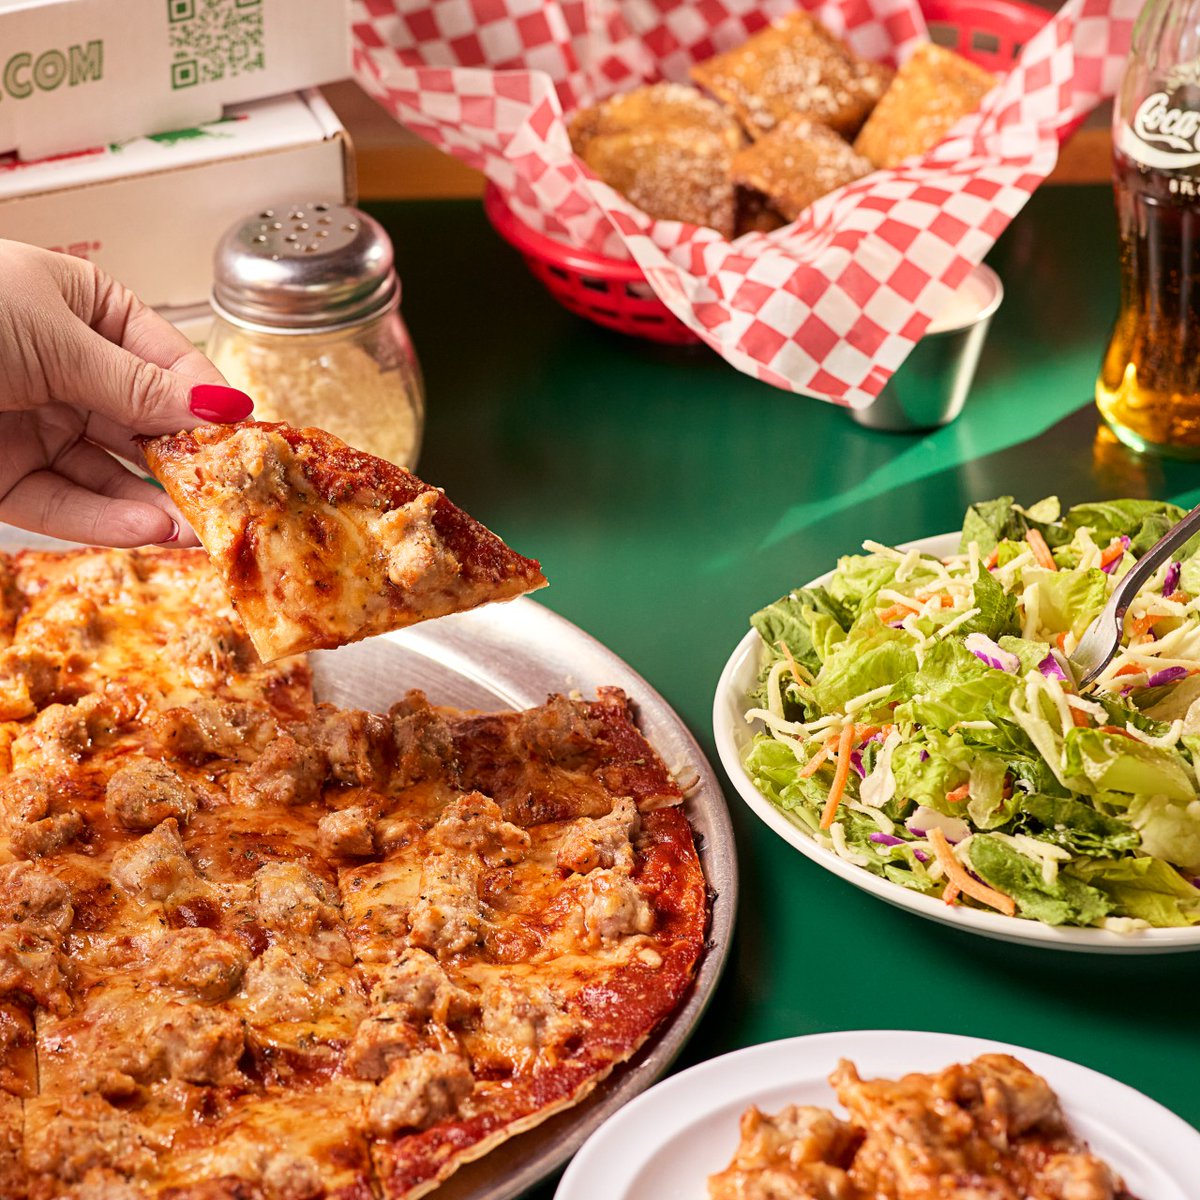 🎉 Party Like It’s 1964! 

Get a Large 1-Topping Pizza and House Salad for $19.64

#ImosPizza #STL #Imos60 #STLMade